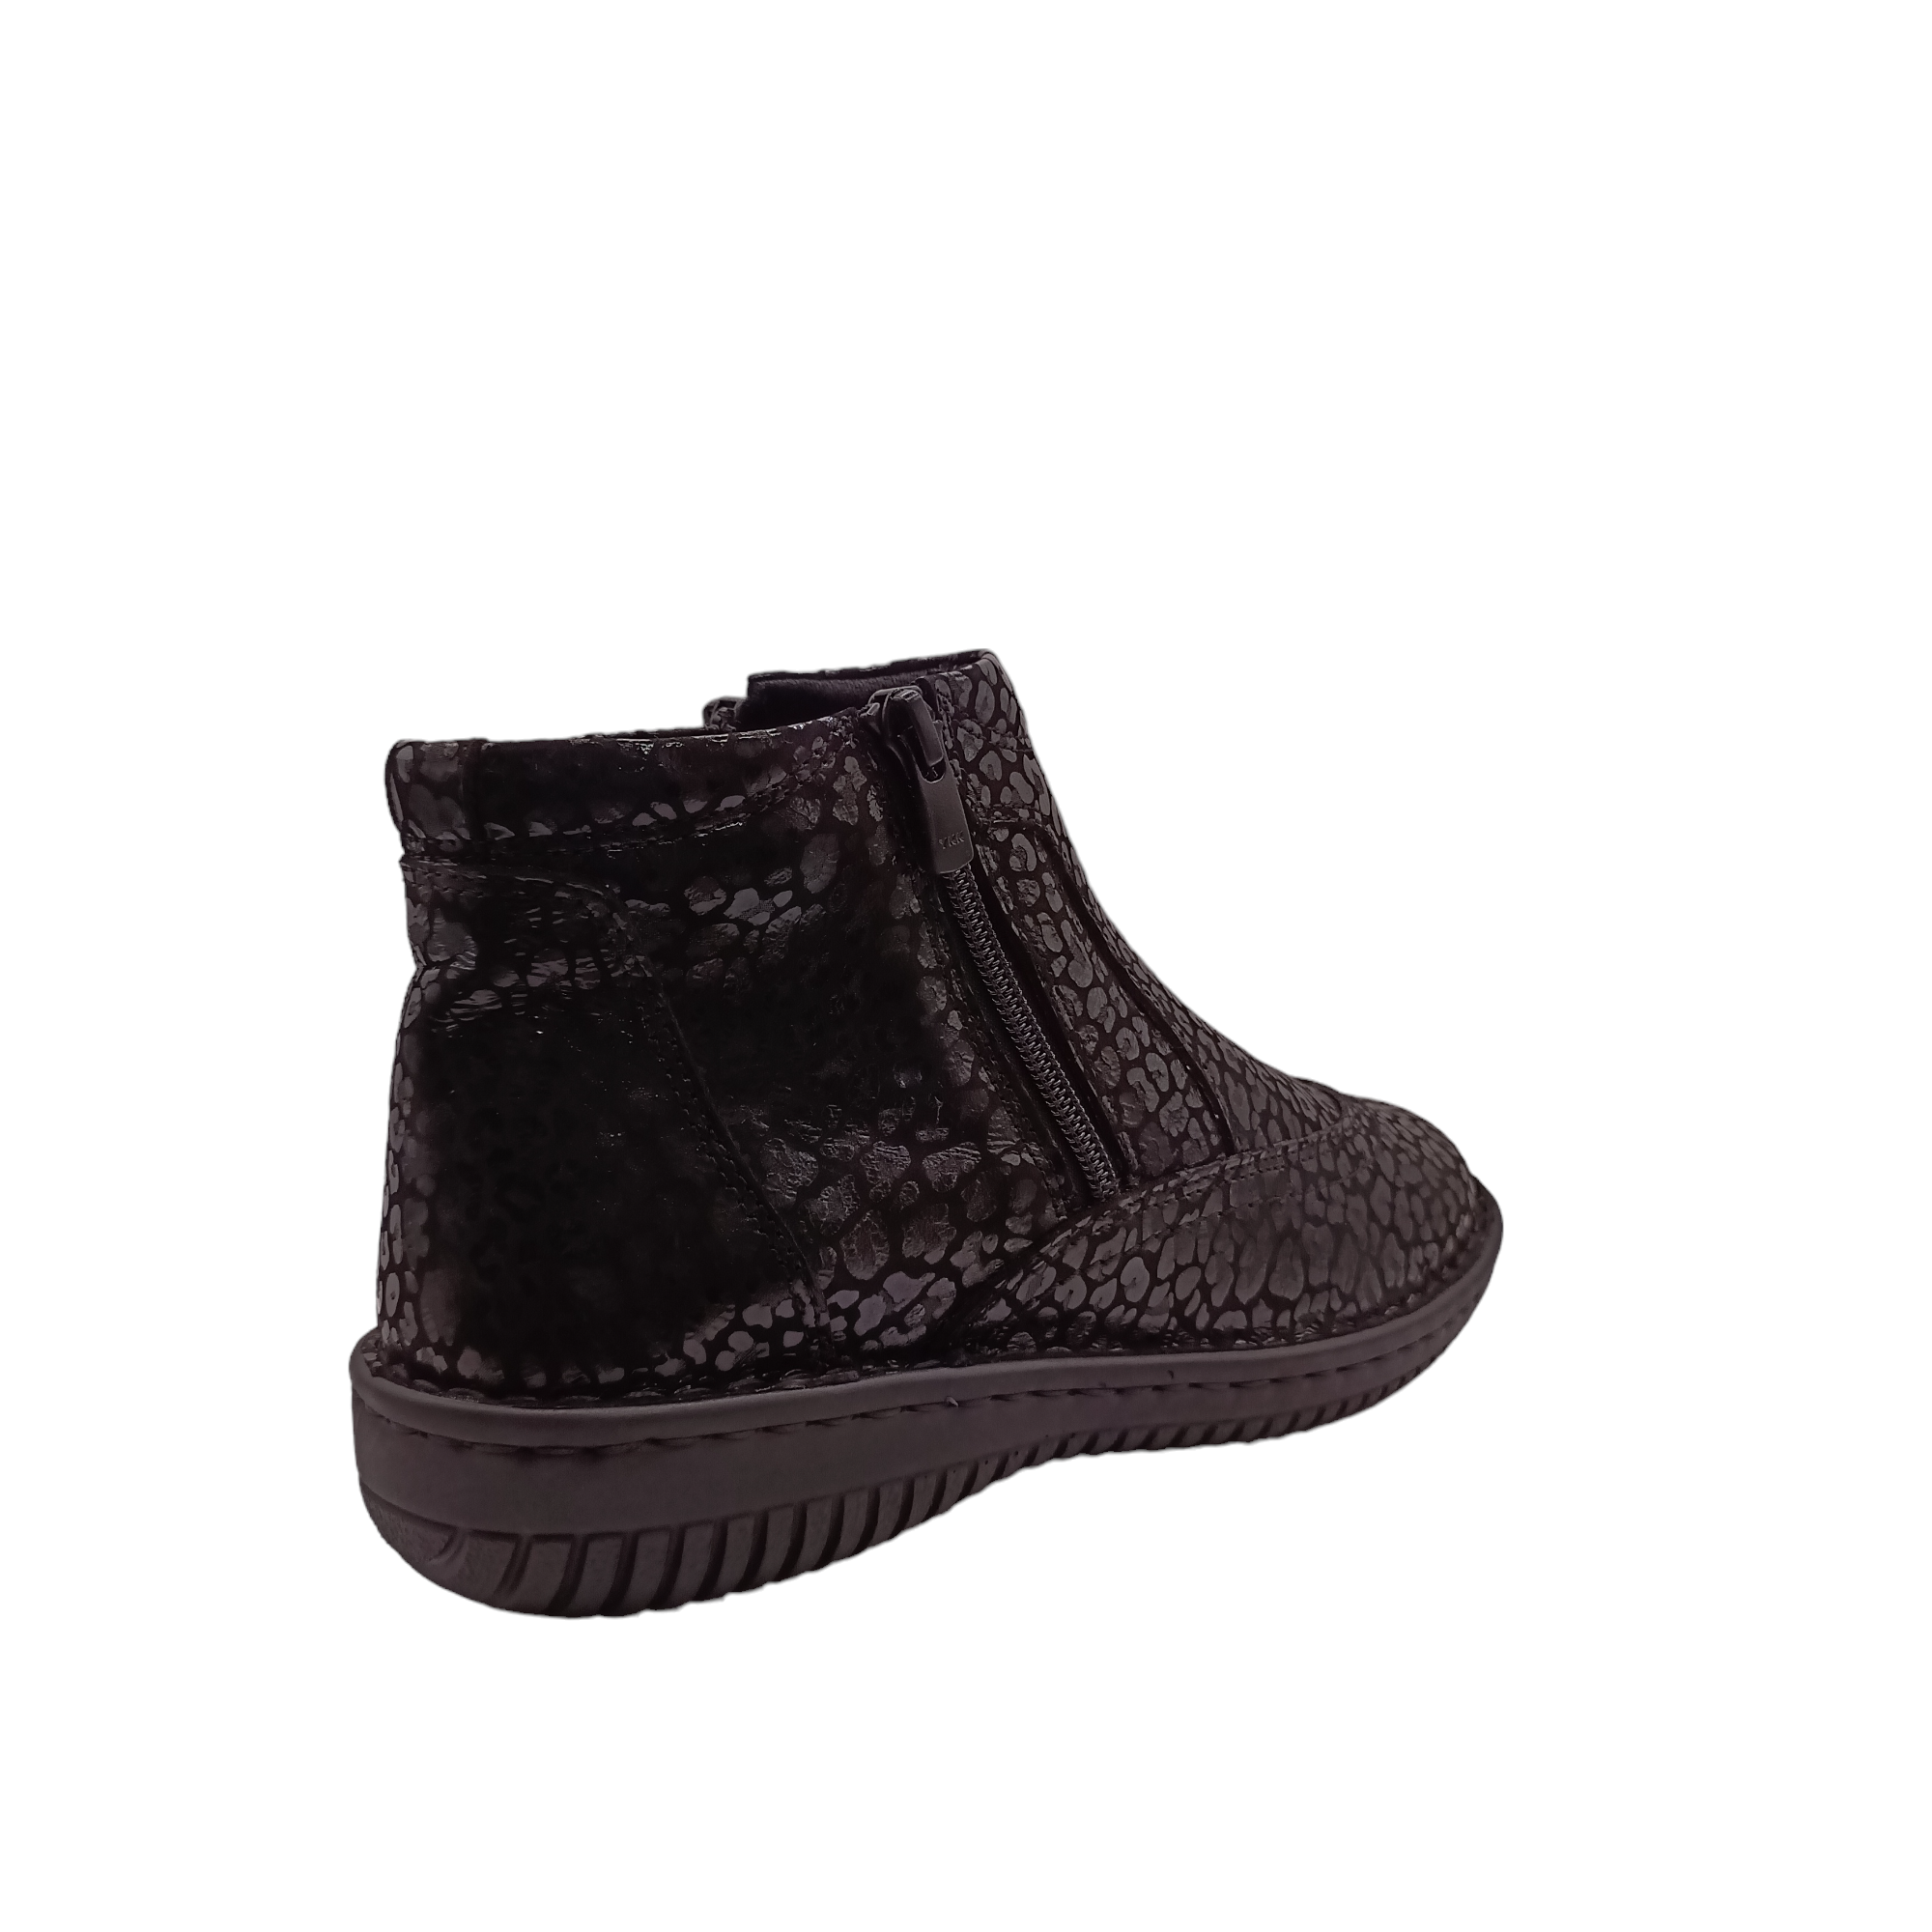 Shop CP522-32 Cabello - with shoe&amp;me - from Cabello - Boots - Boot, Winter, Womens - [collection]